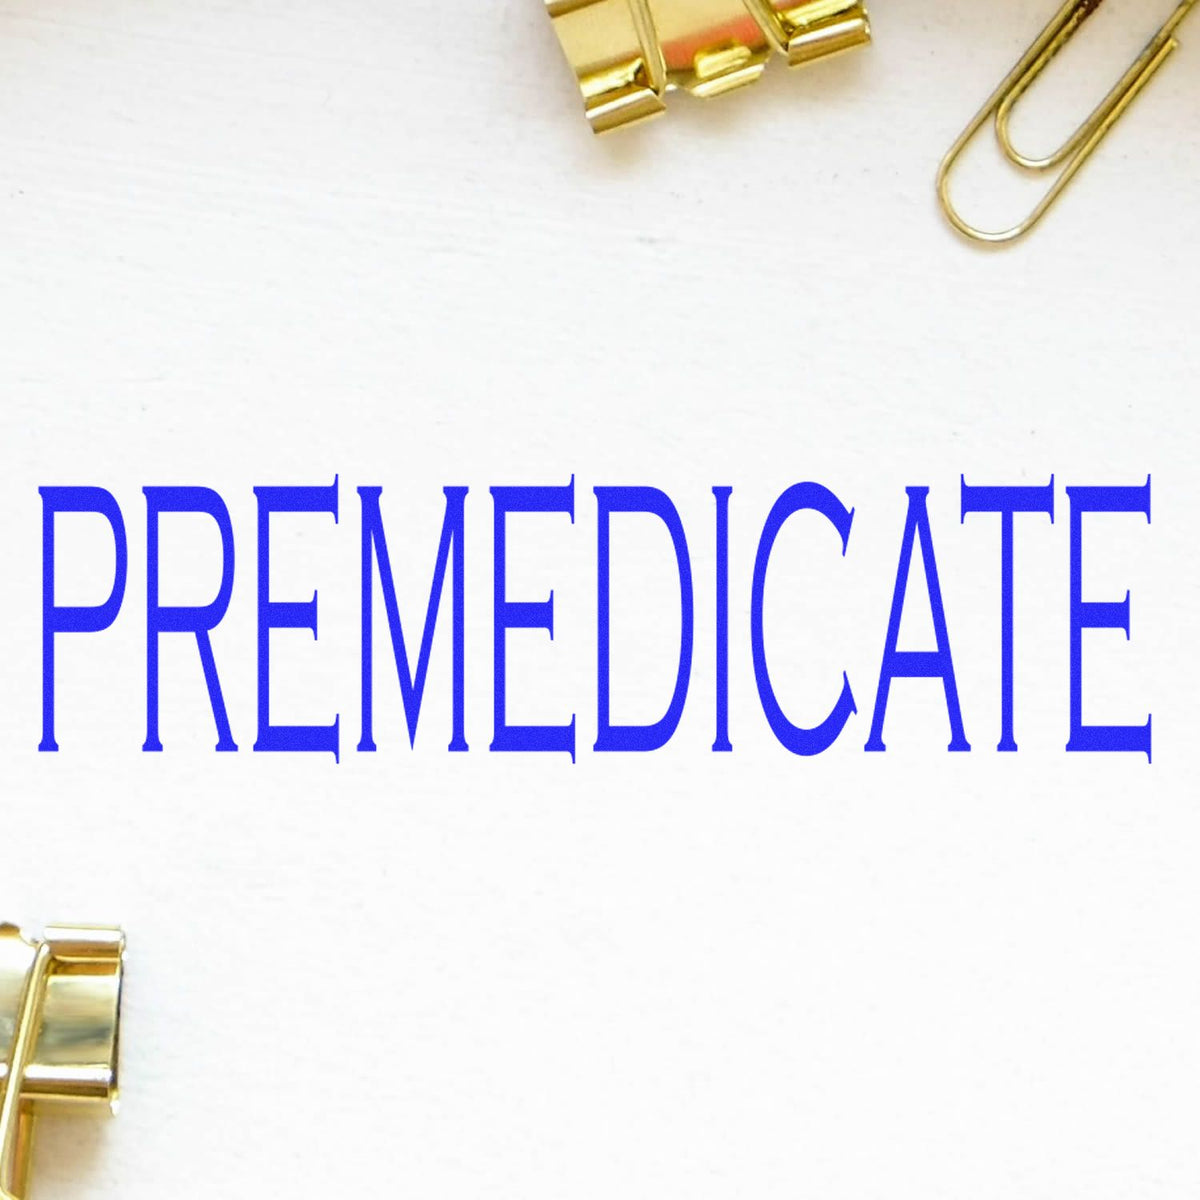 Self Inking Premedicate Stamp In Use Photo